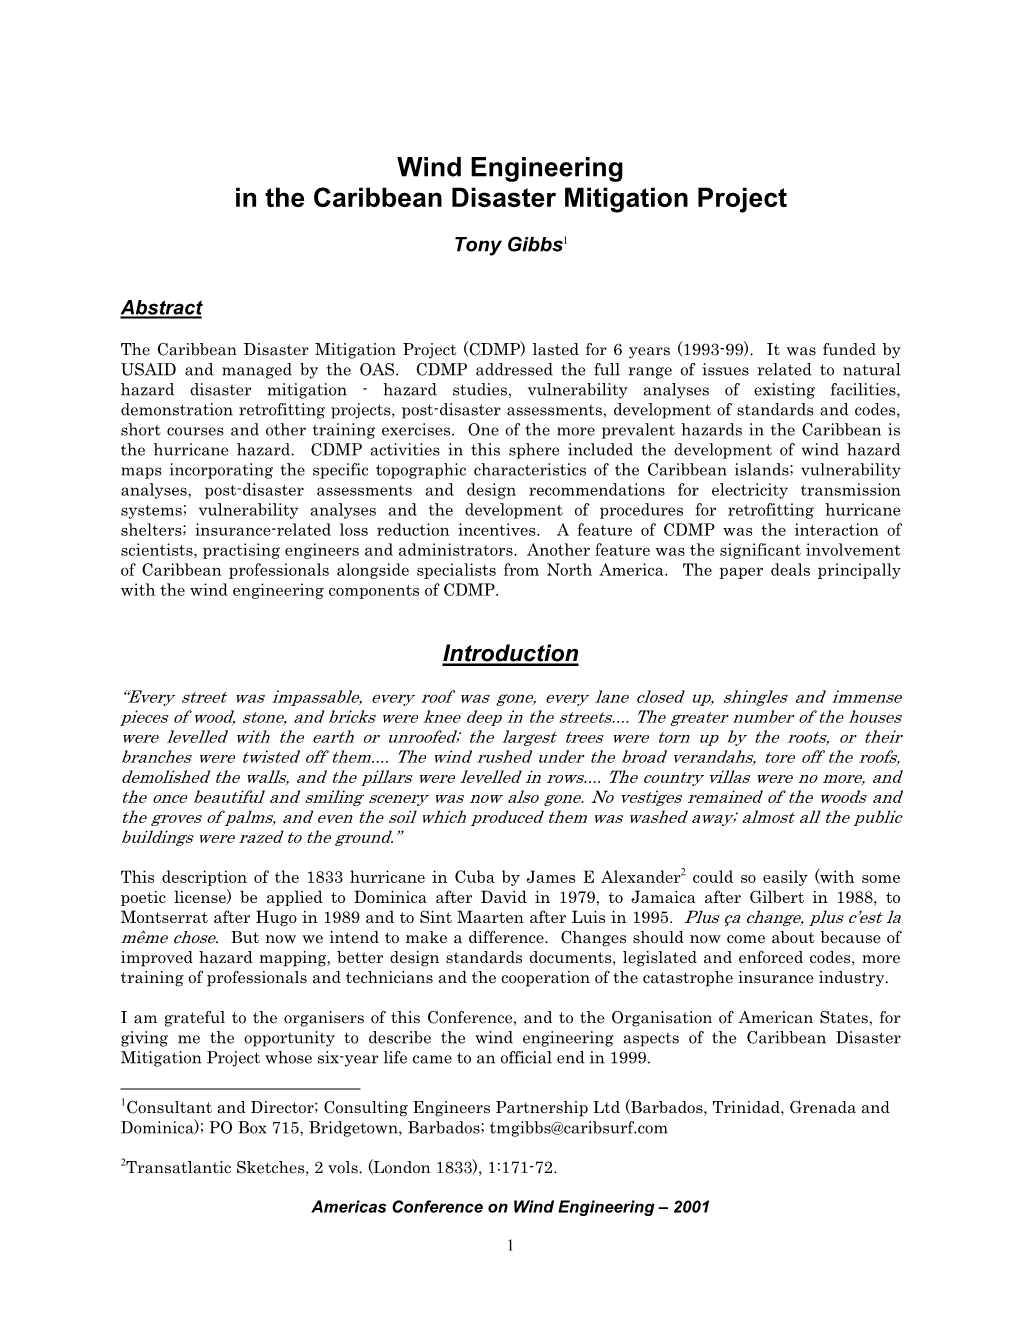 Wind Engineering in the Caribbean Disaster Mitigation Project